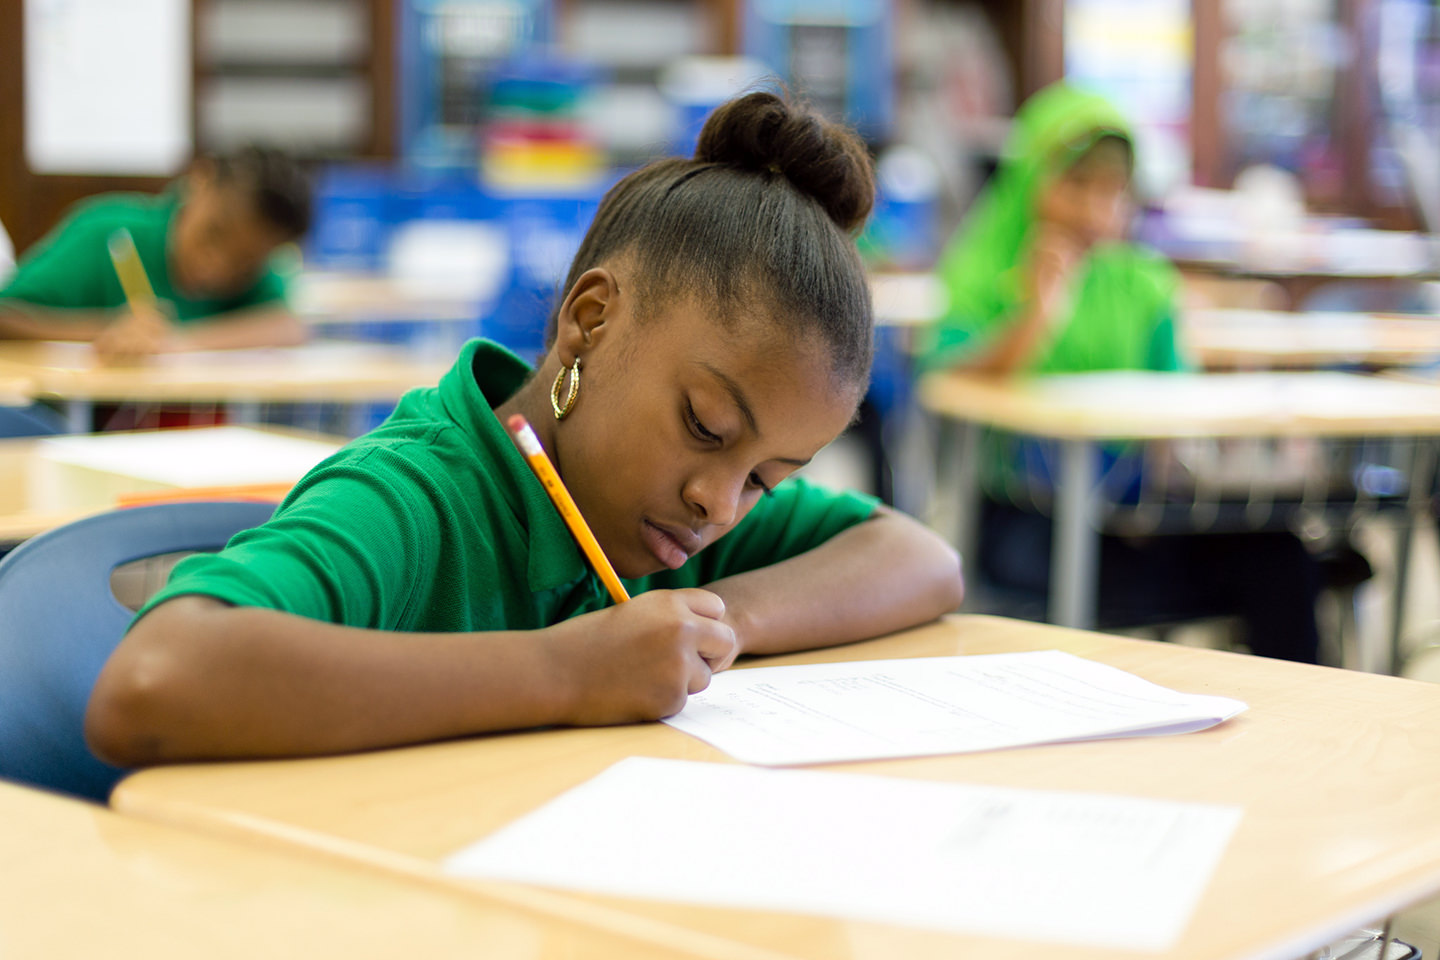 Should we still teach kids to take notes by hand?